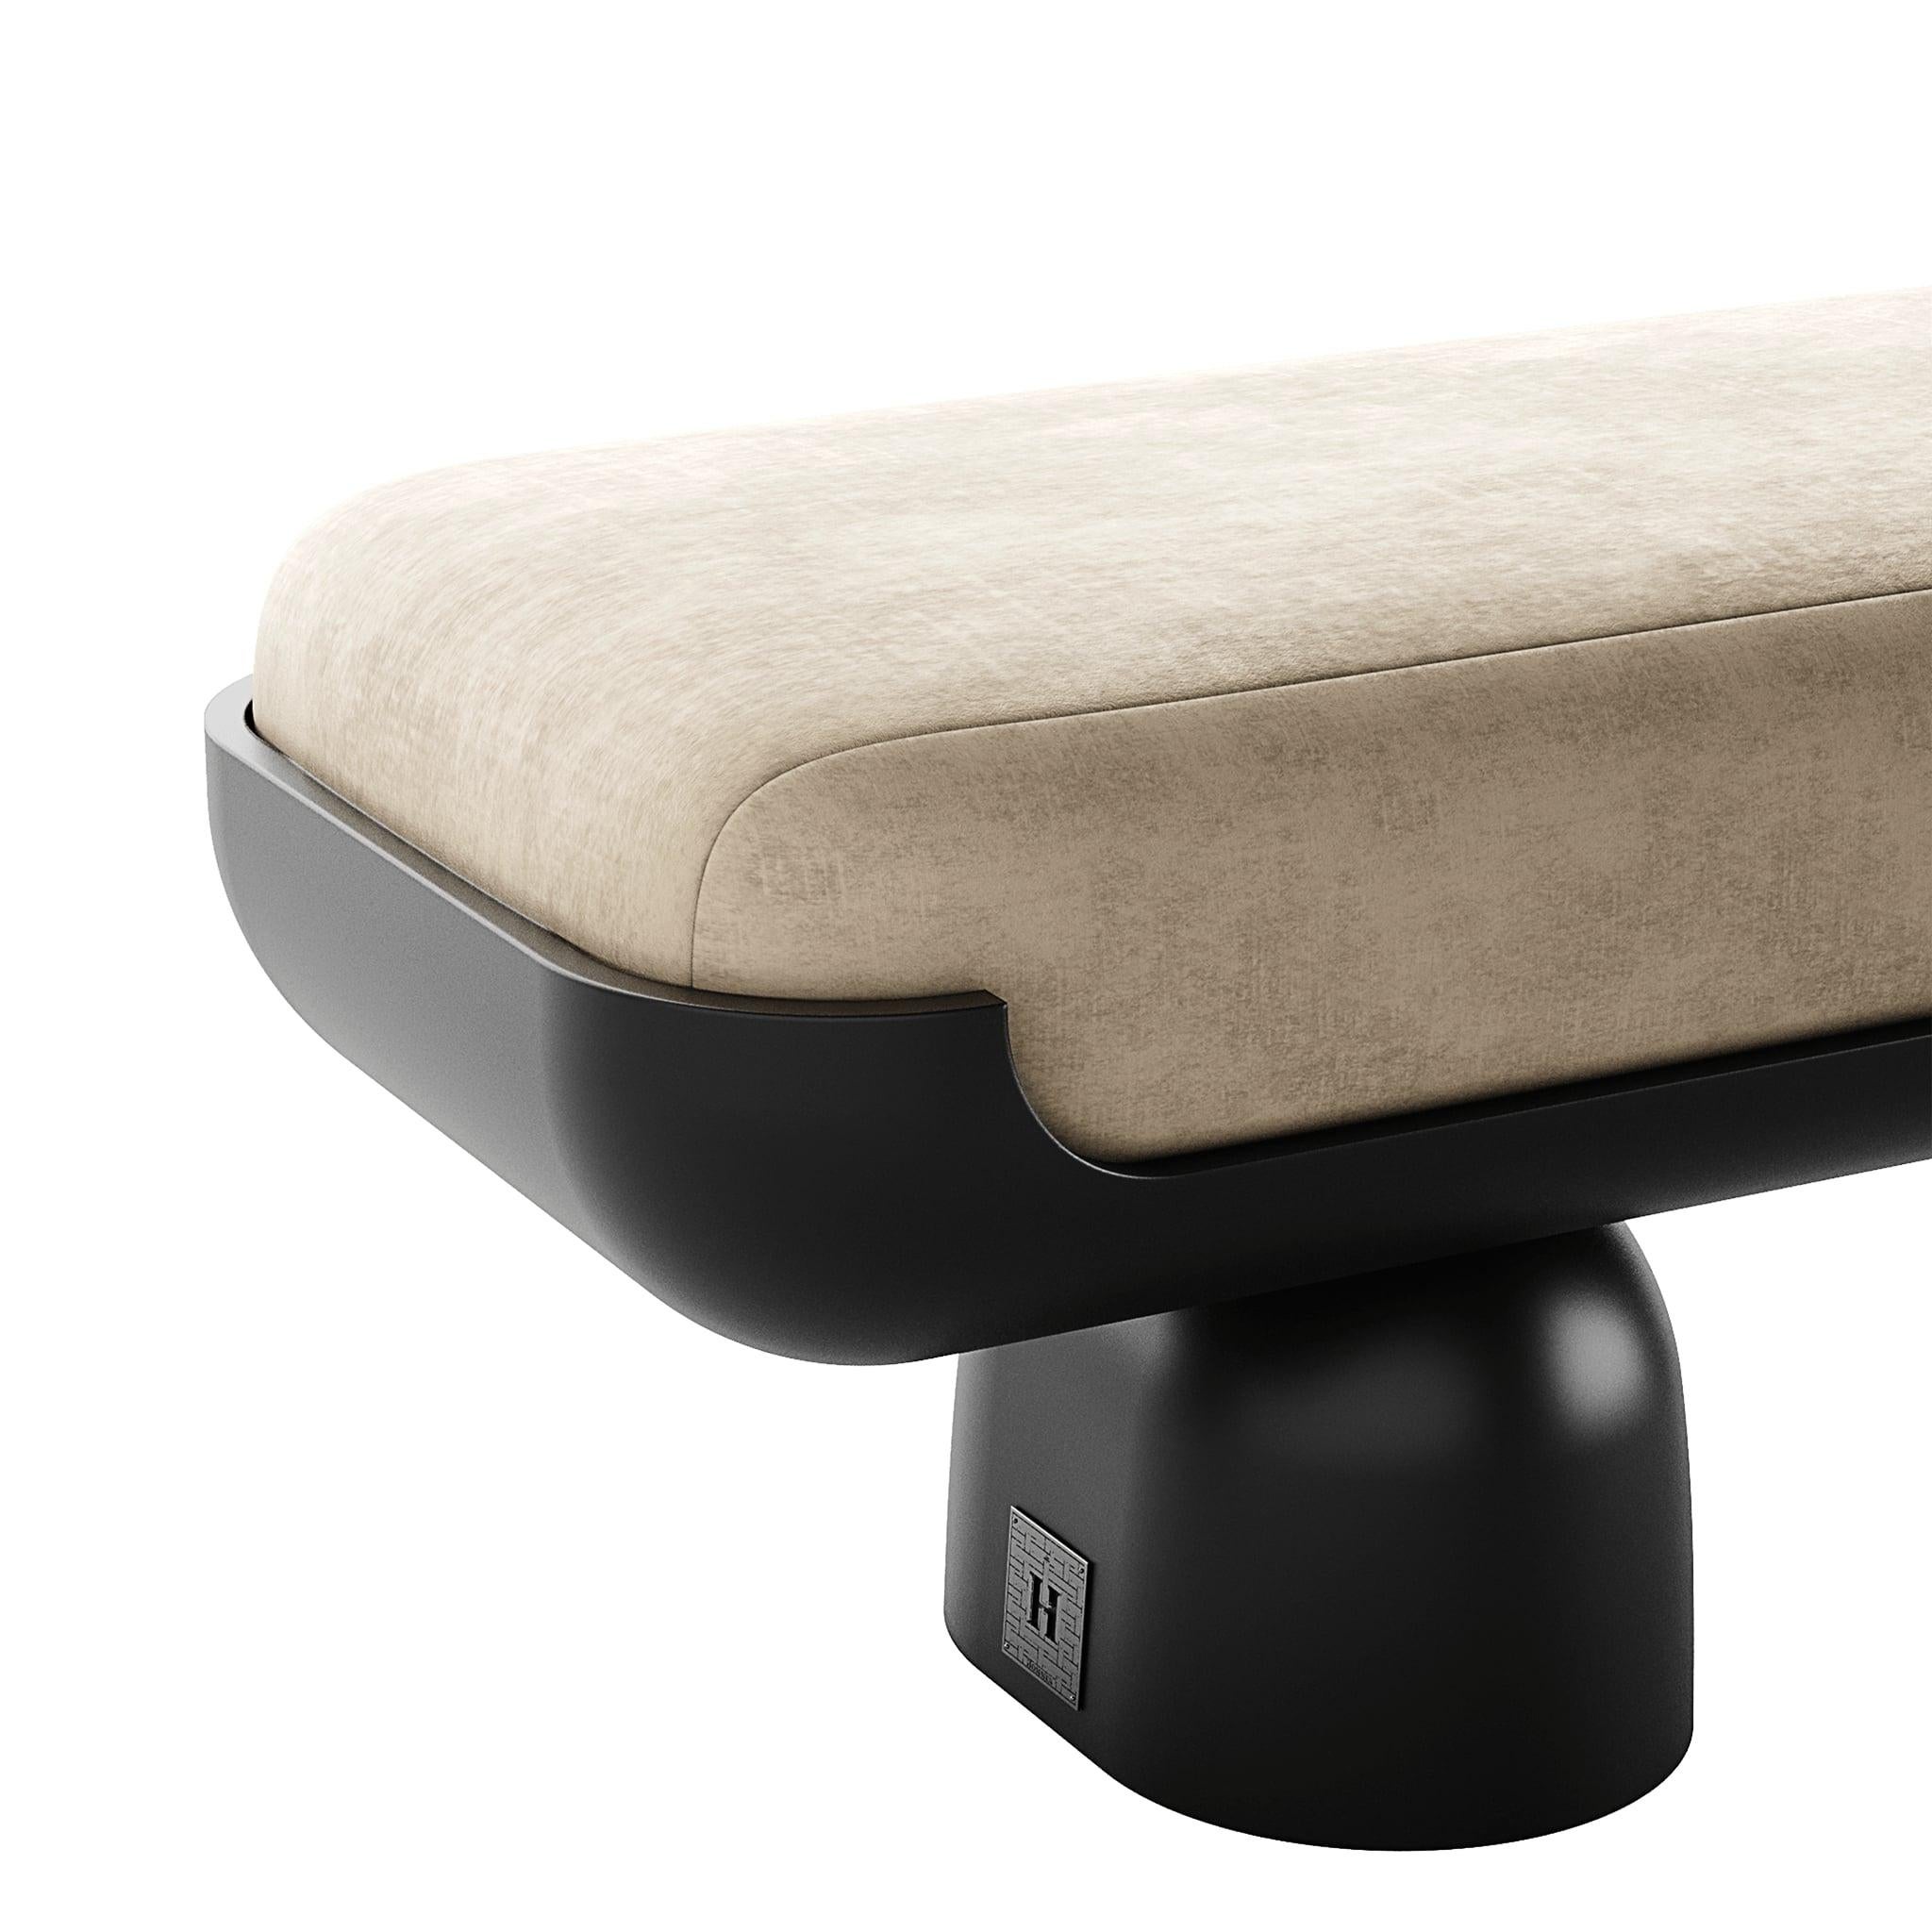 Fifih Bench is a luxury bench upholstered in velvet and wood base. A contemporary design bench is perfect for minimalist and modern interior architecture projects.

Materials: Upholstered in velvet; Base lacquered in black in matte.

Dimensions: